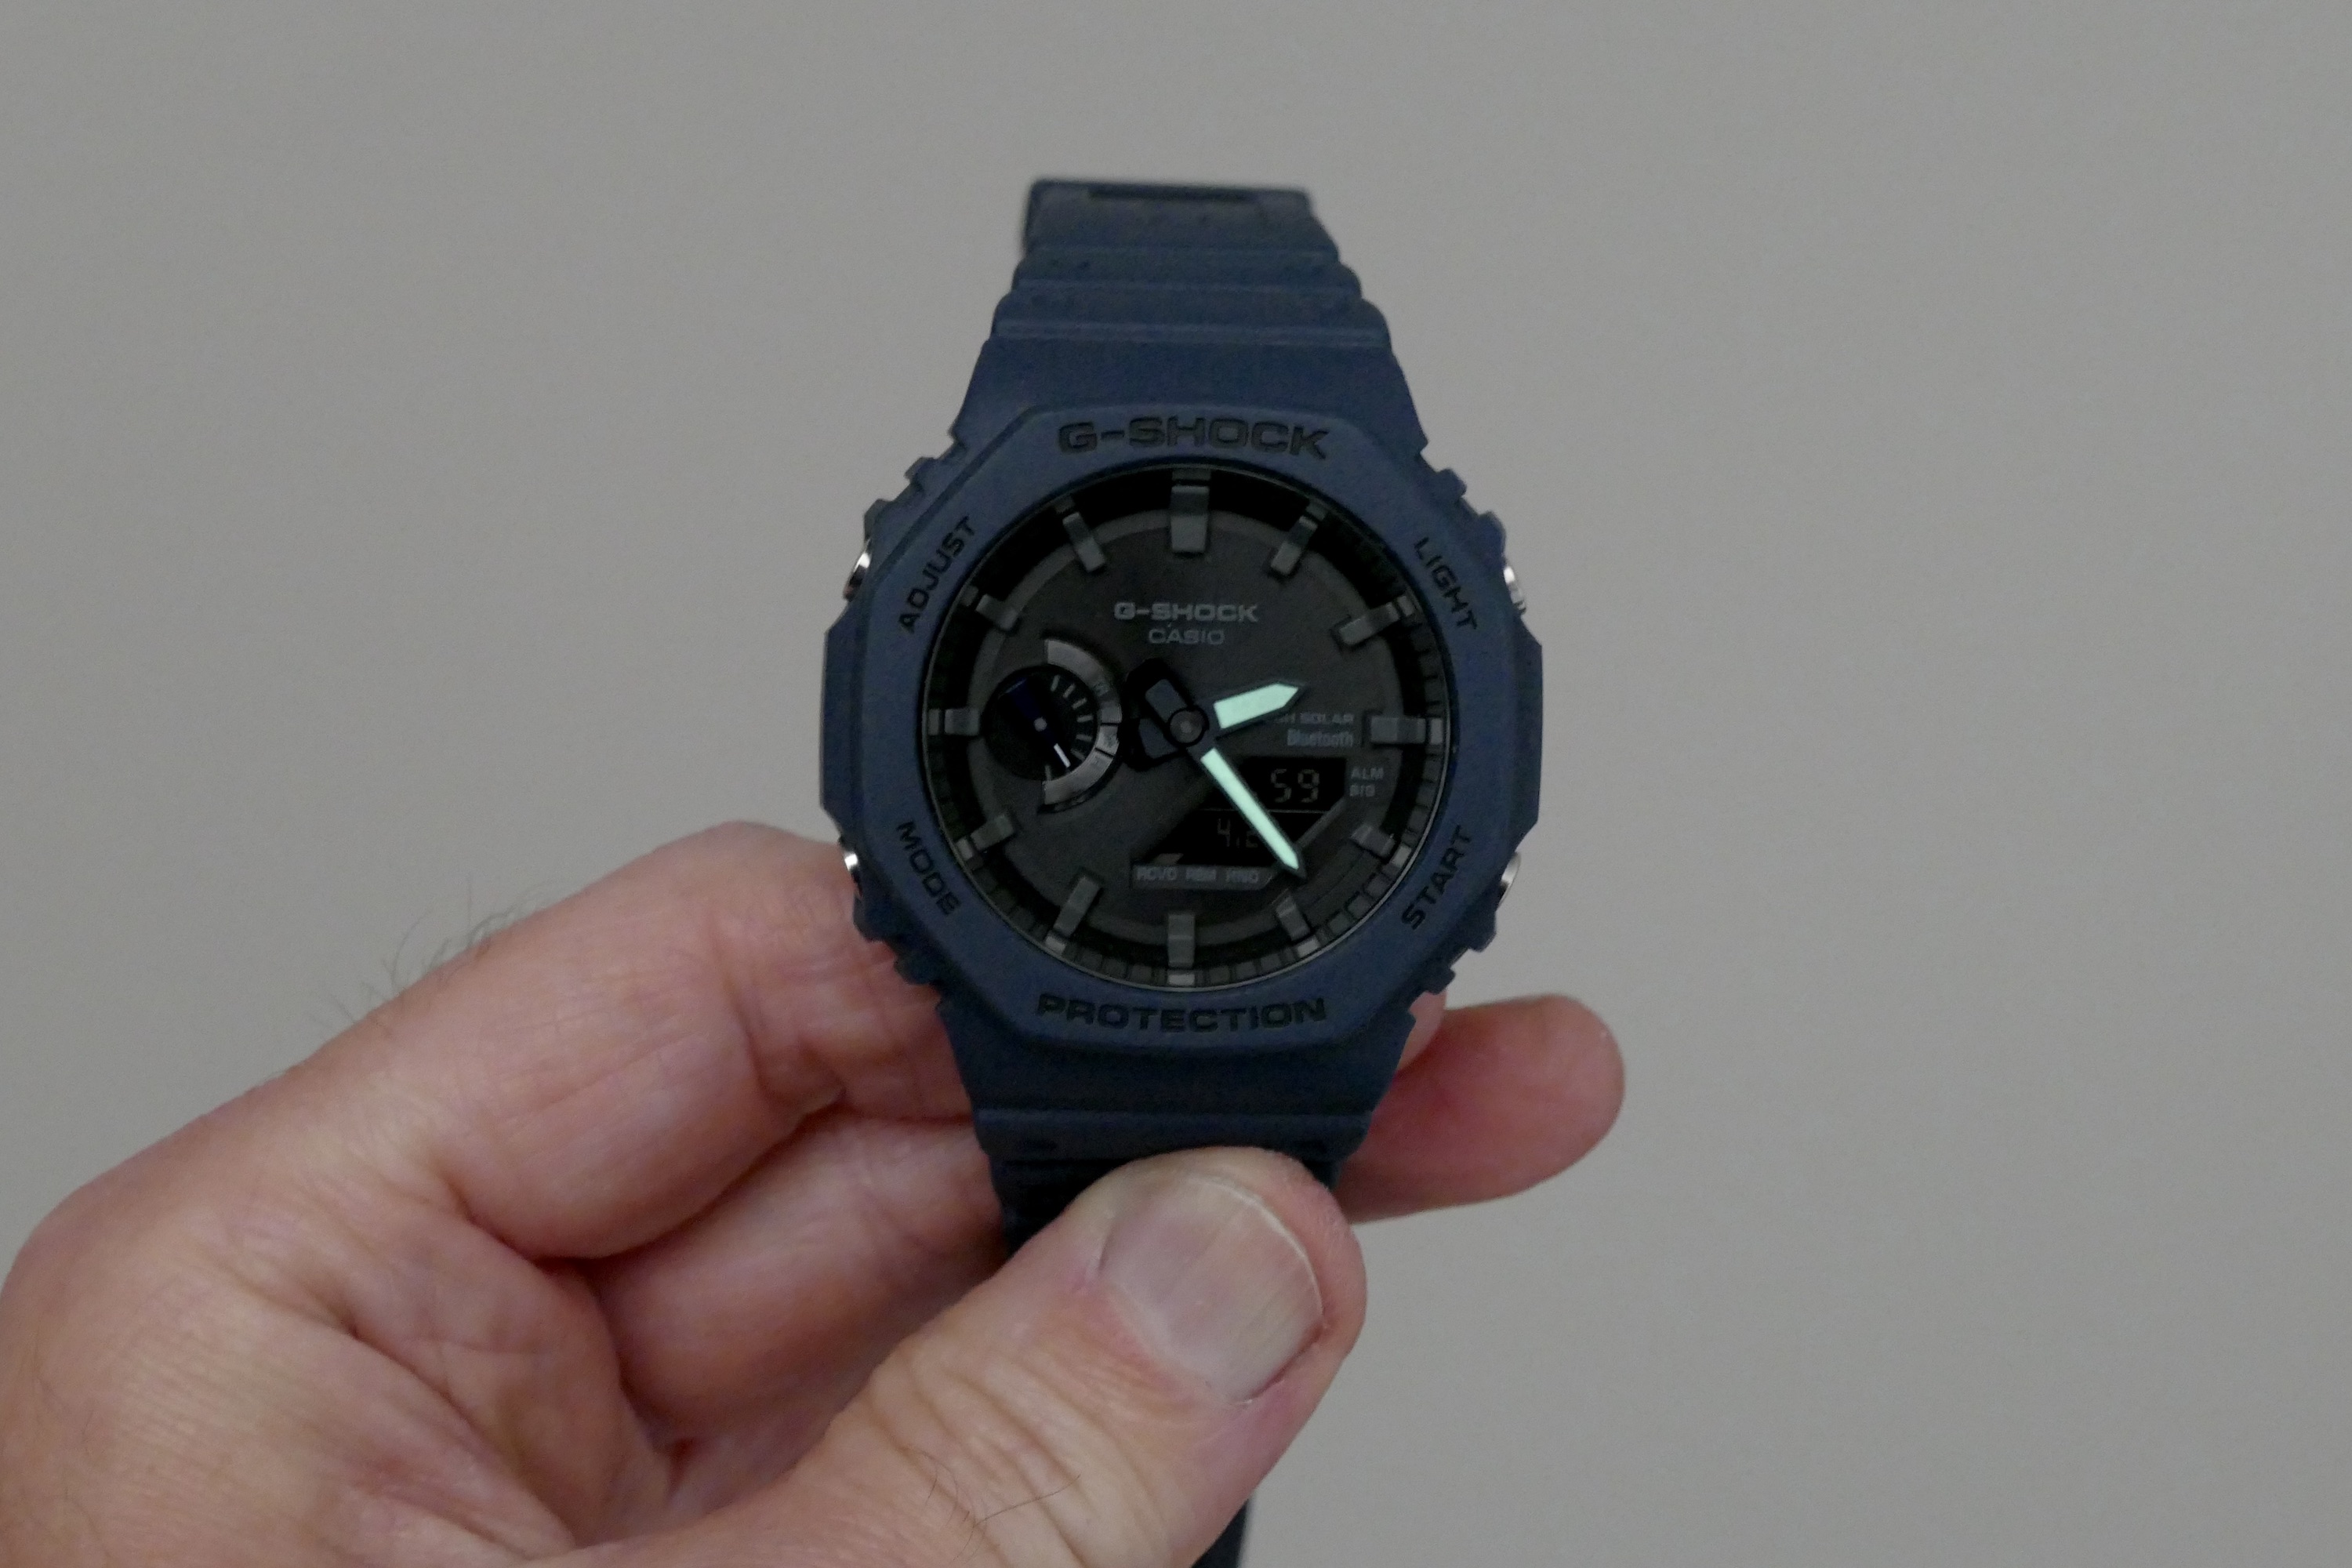 The tech-boosted G-Shock GA-B2100 watch is a great buy | Digital Trends